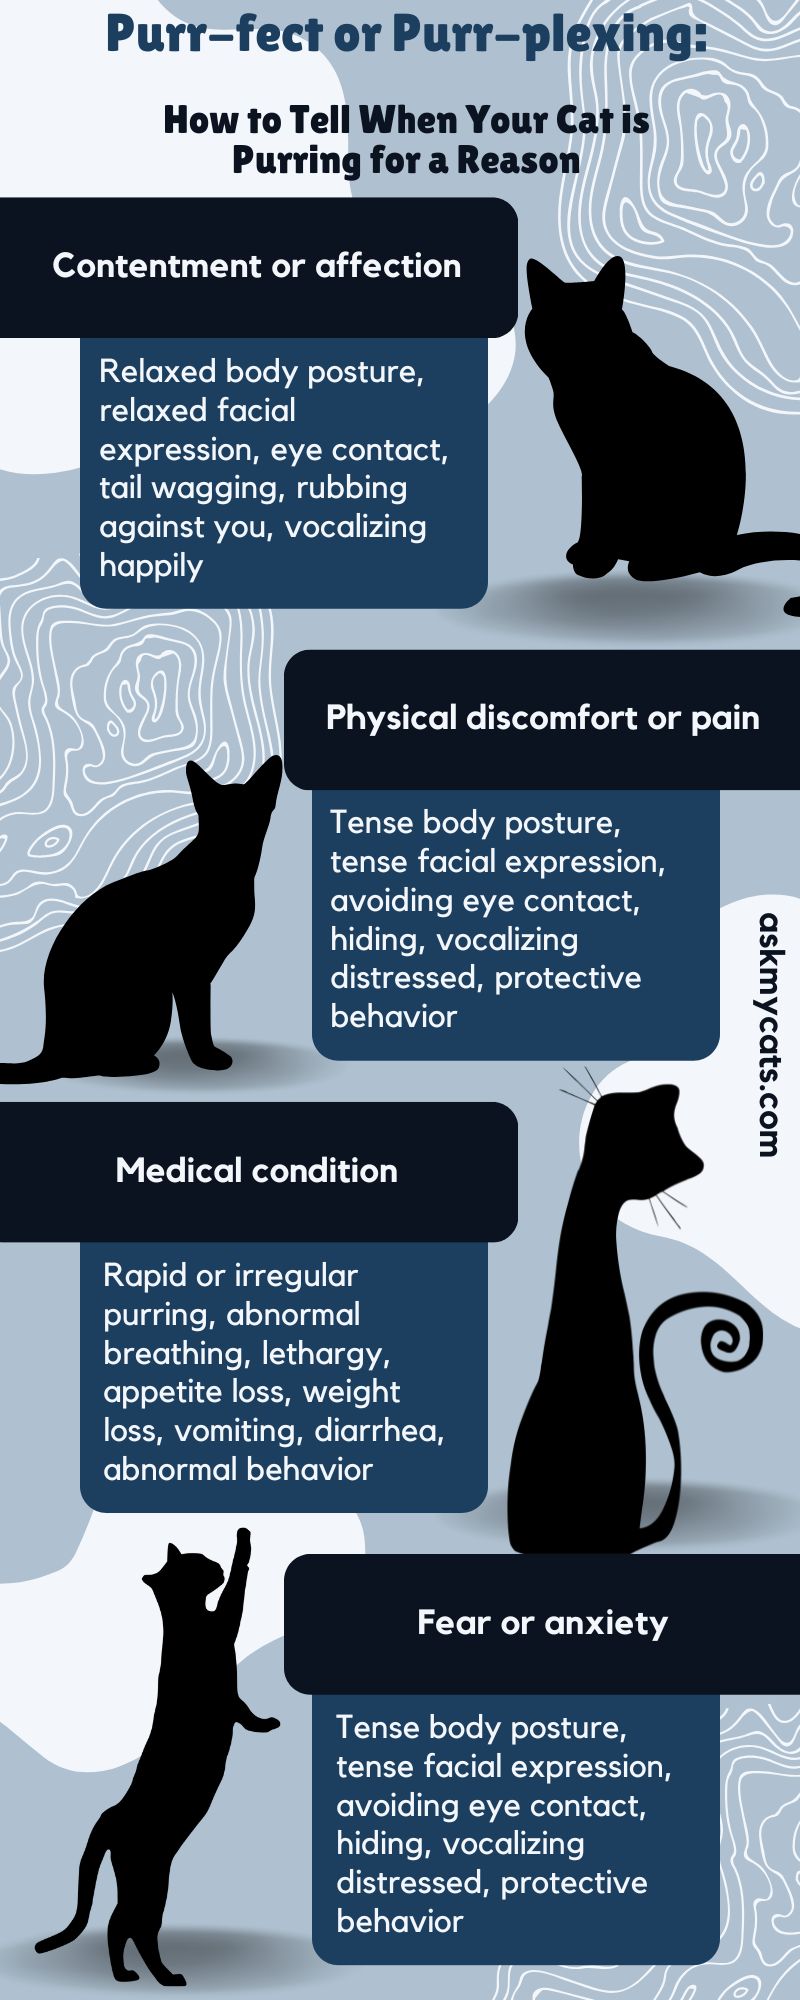 Purr-fect or Purr-plexing: How to Tell When Your Cat is Purring for a Reason (Infographic)